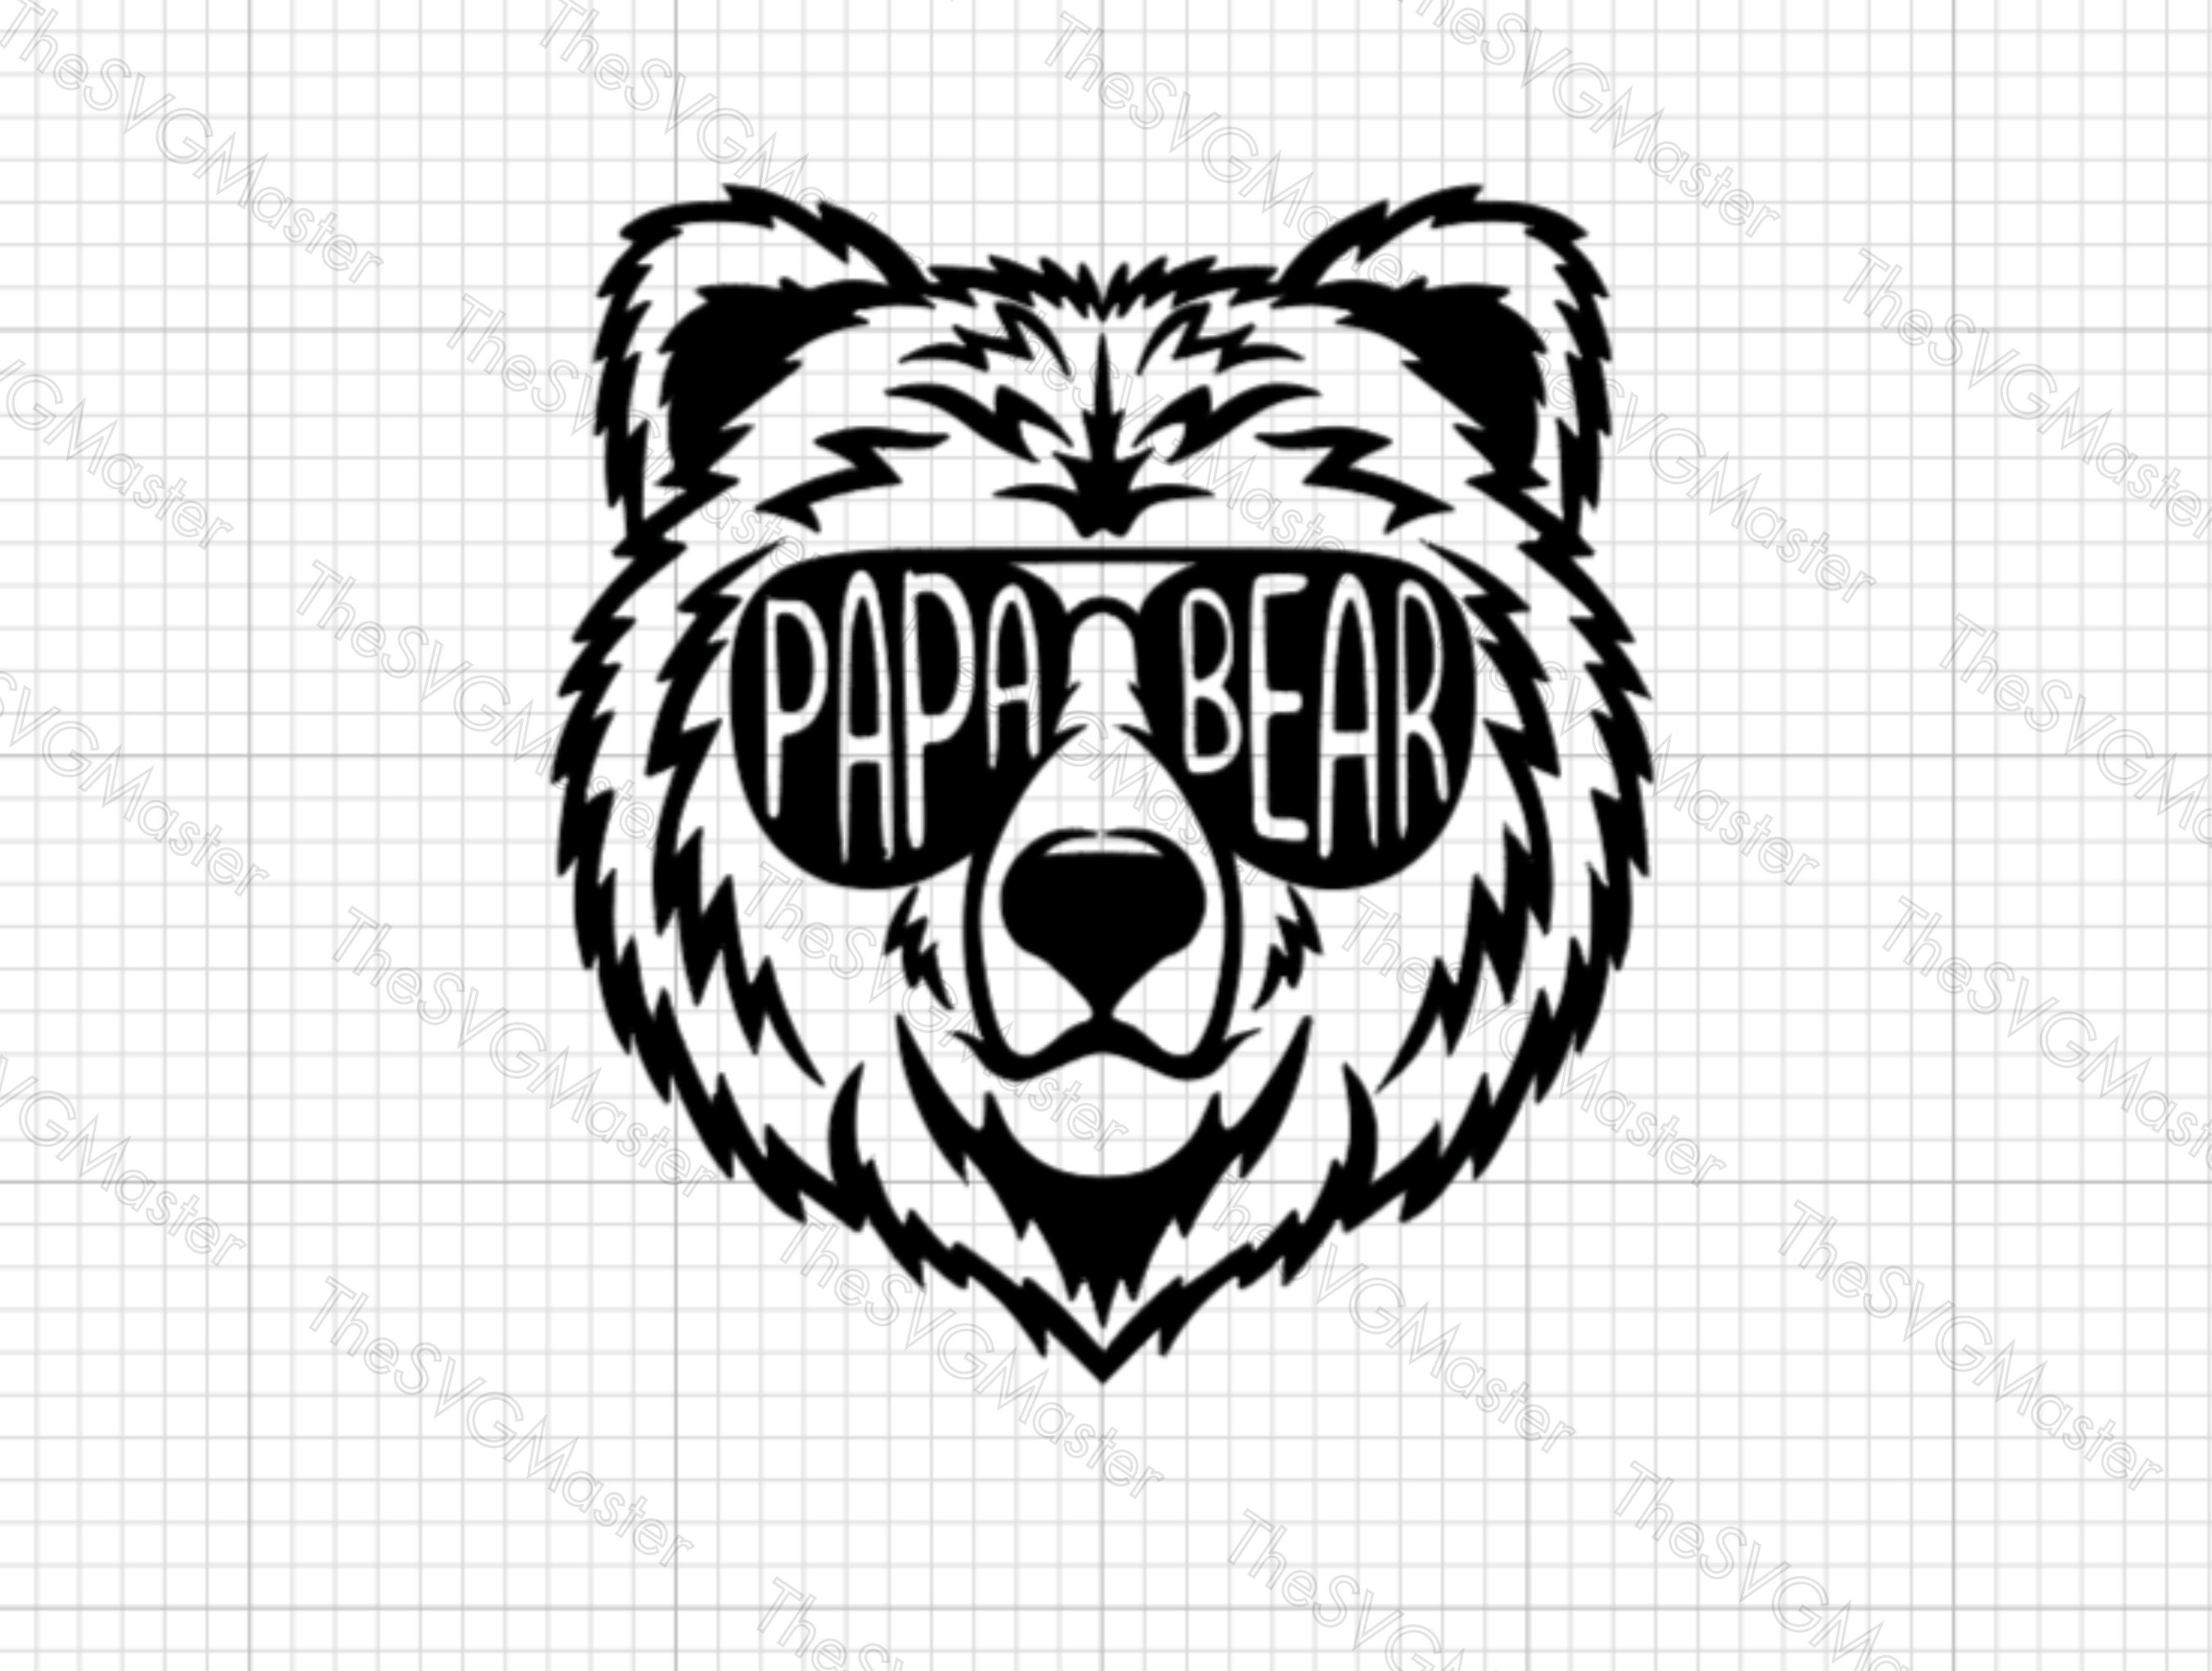 Macorner Papa Bear Gifts for Dad Graphic by little rabbit 995